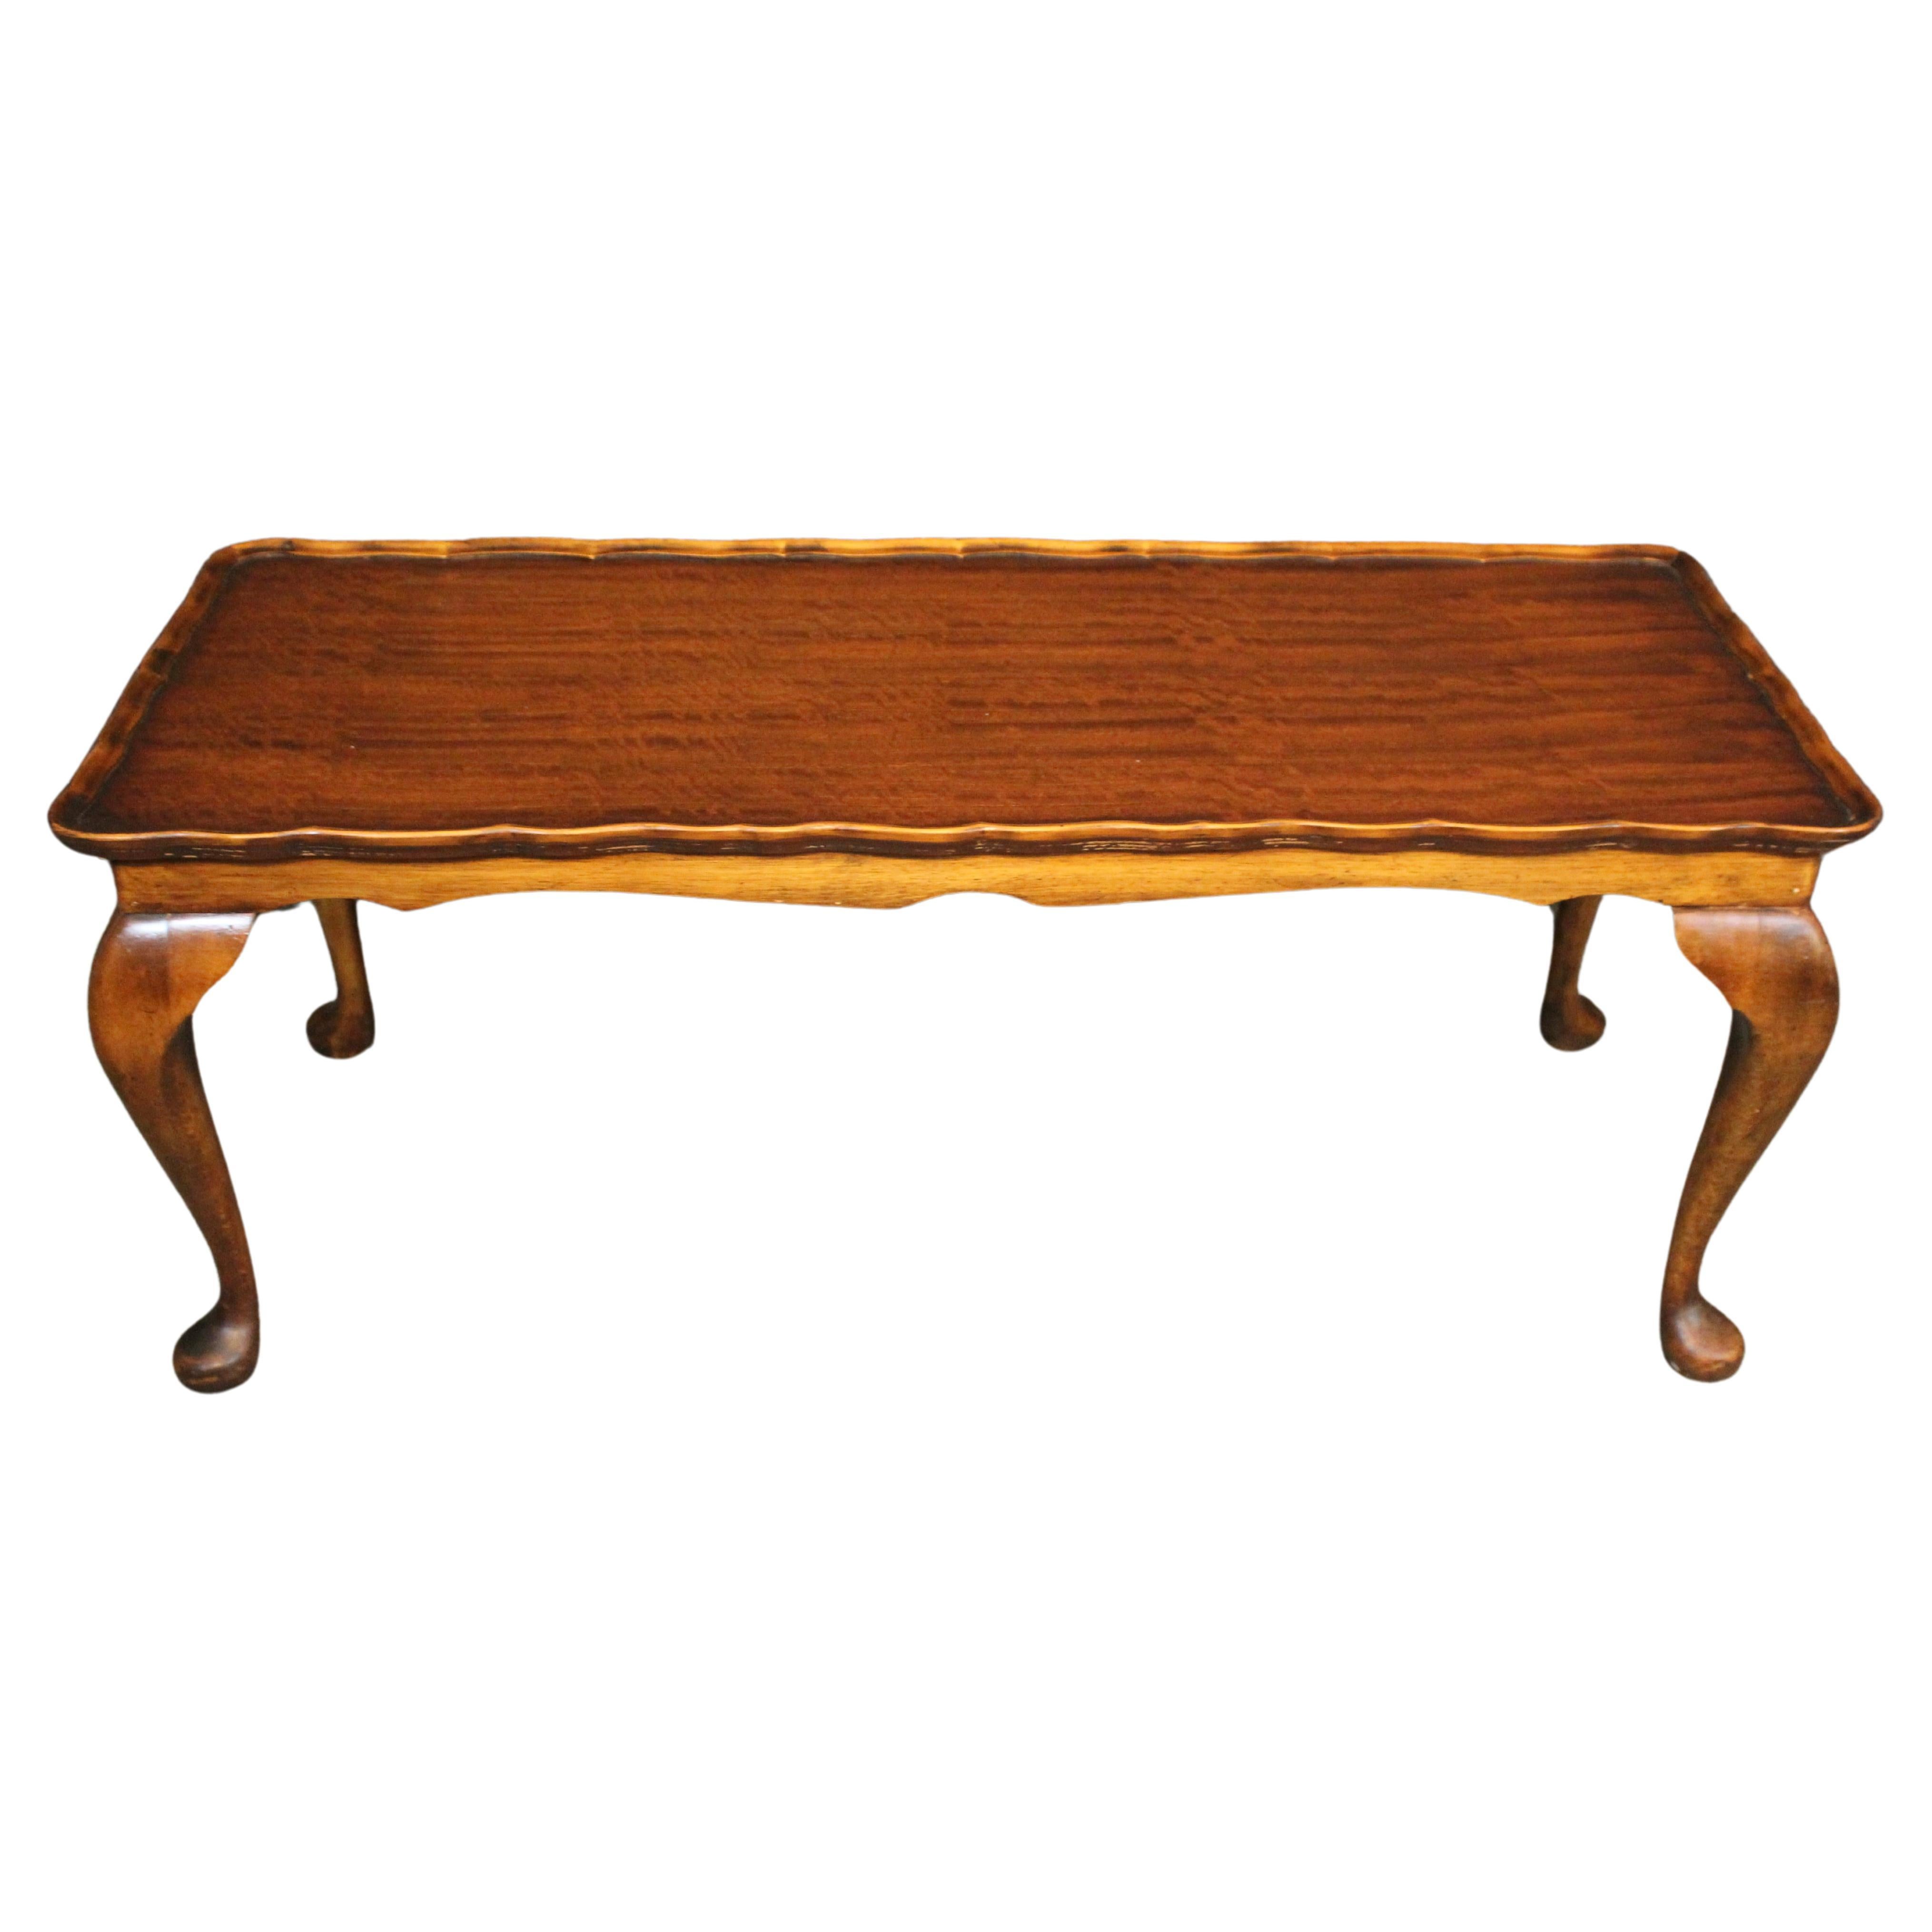 Mahogany Cabriole Table by Bevan Funnell for Reprodux England